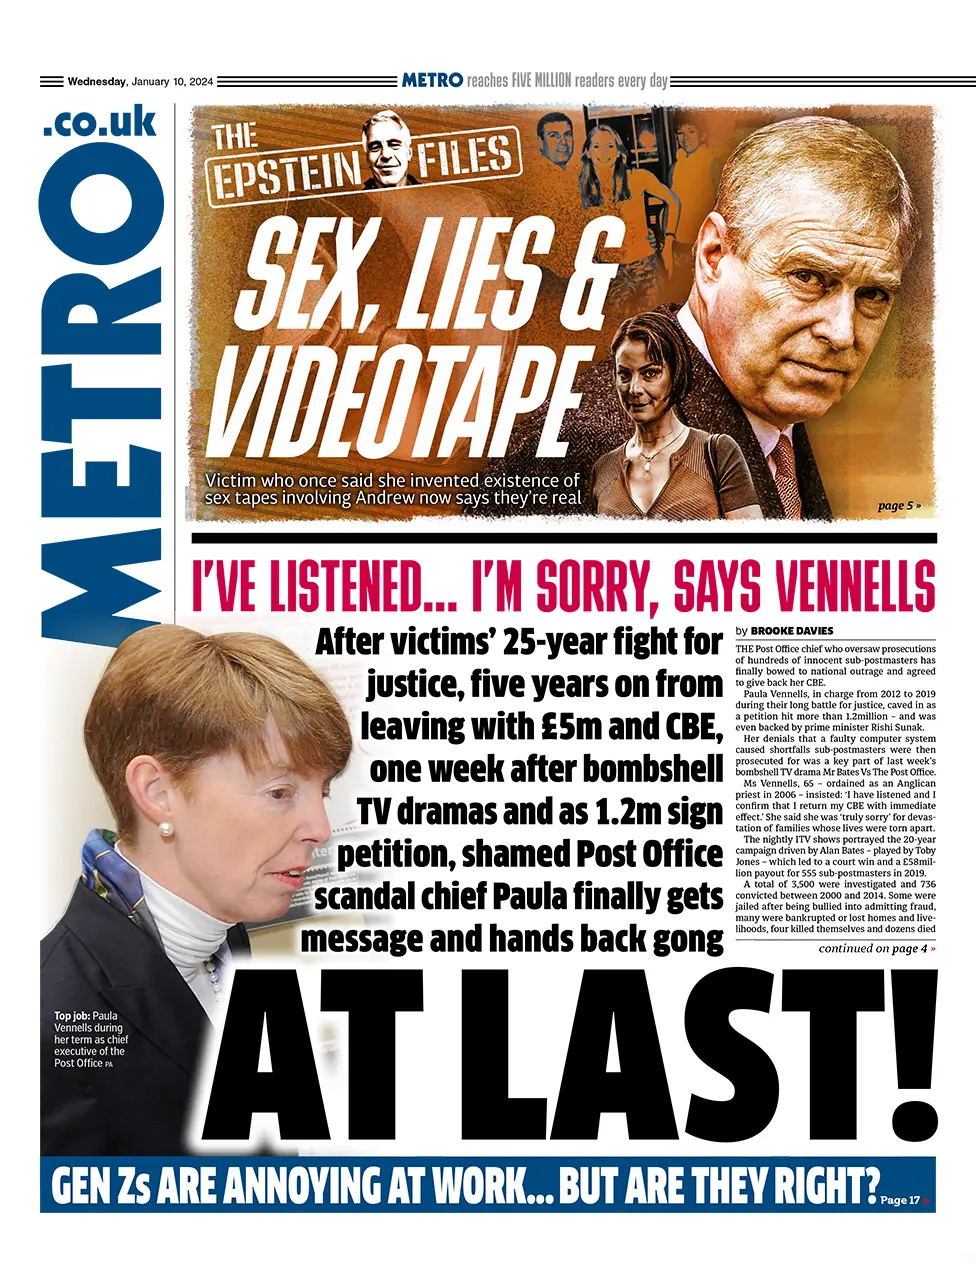 Metro - Vennells hands back CBE and apologies: At last! 